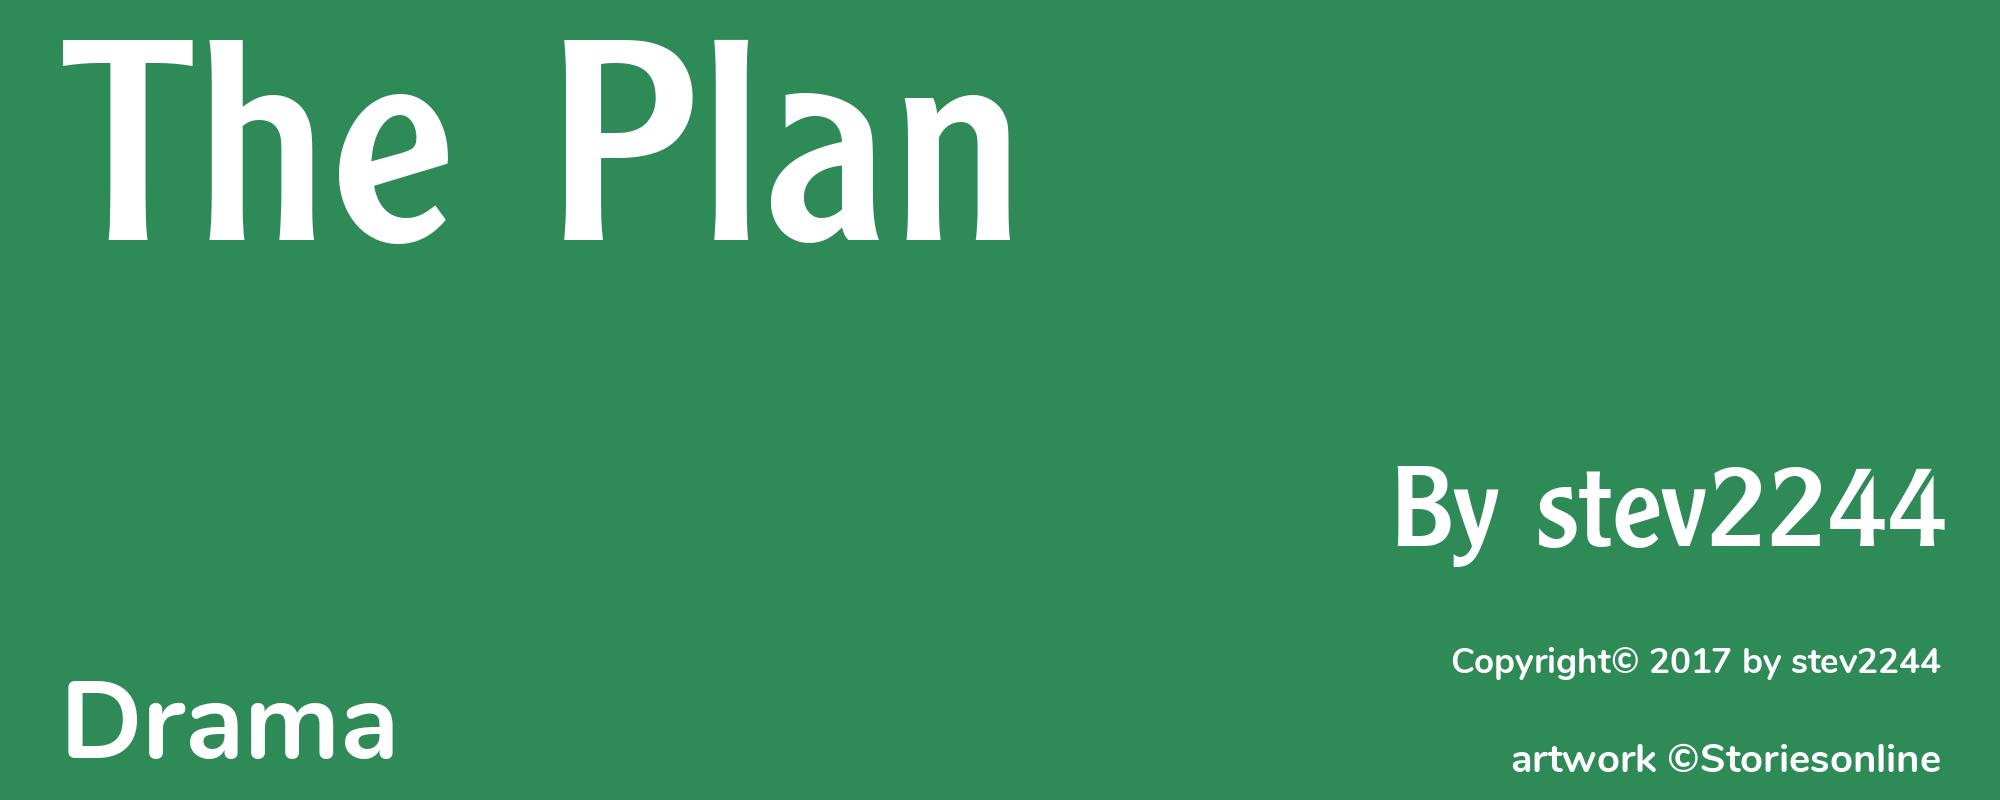 The Plan - Cover